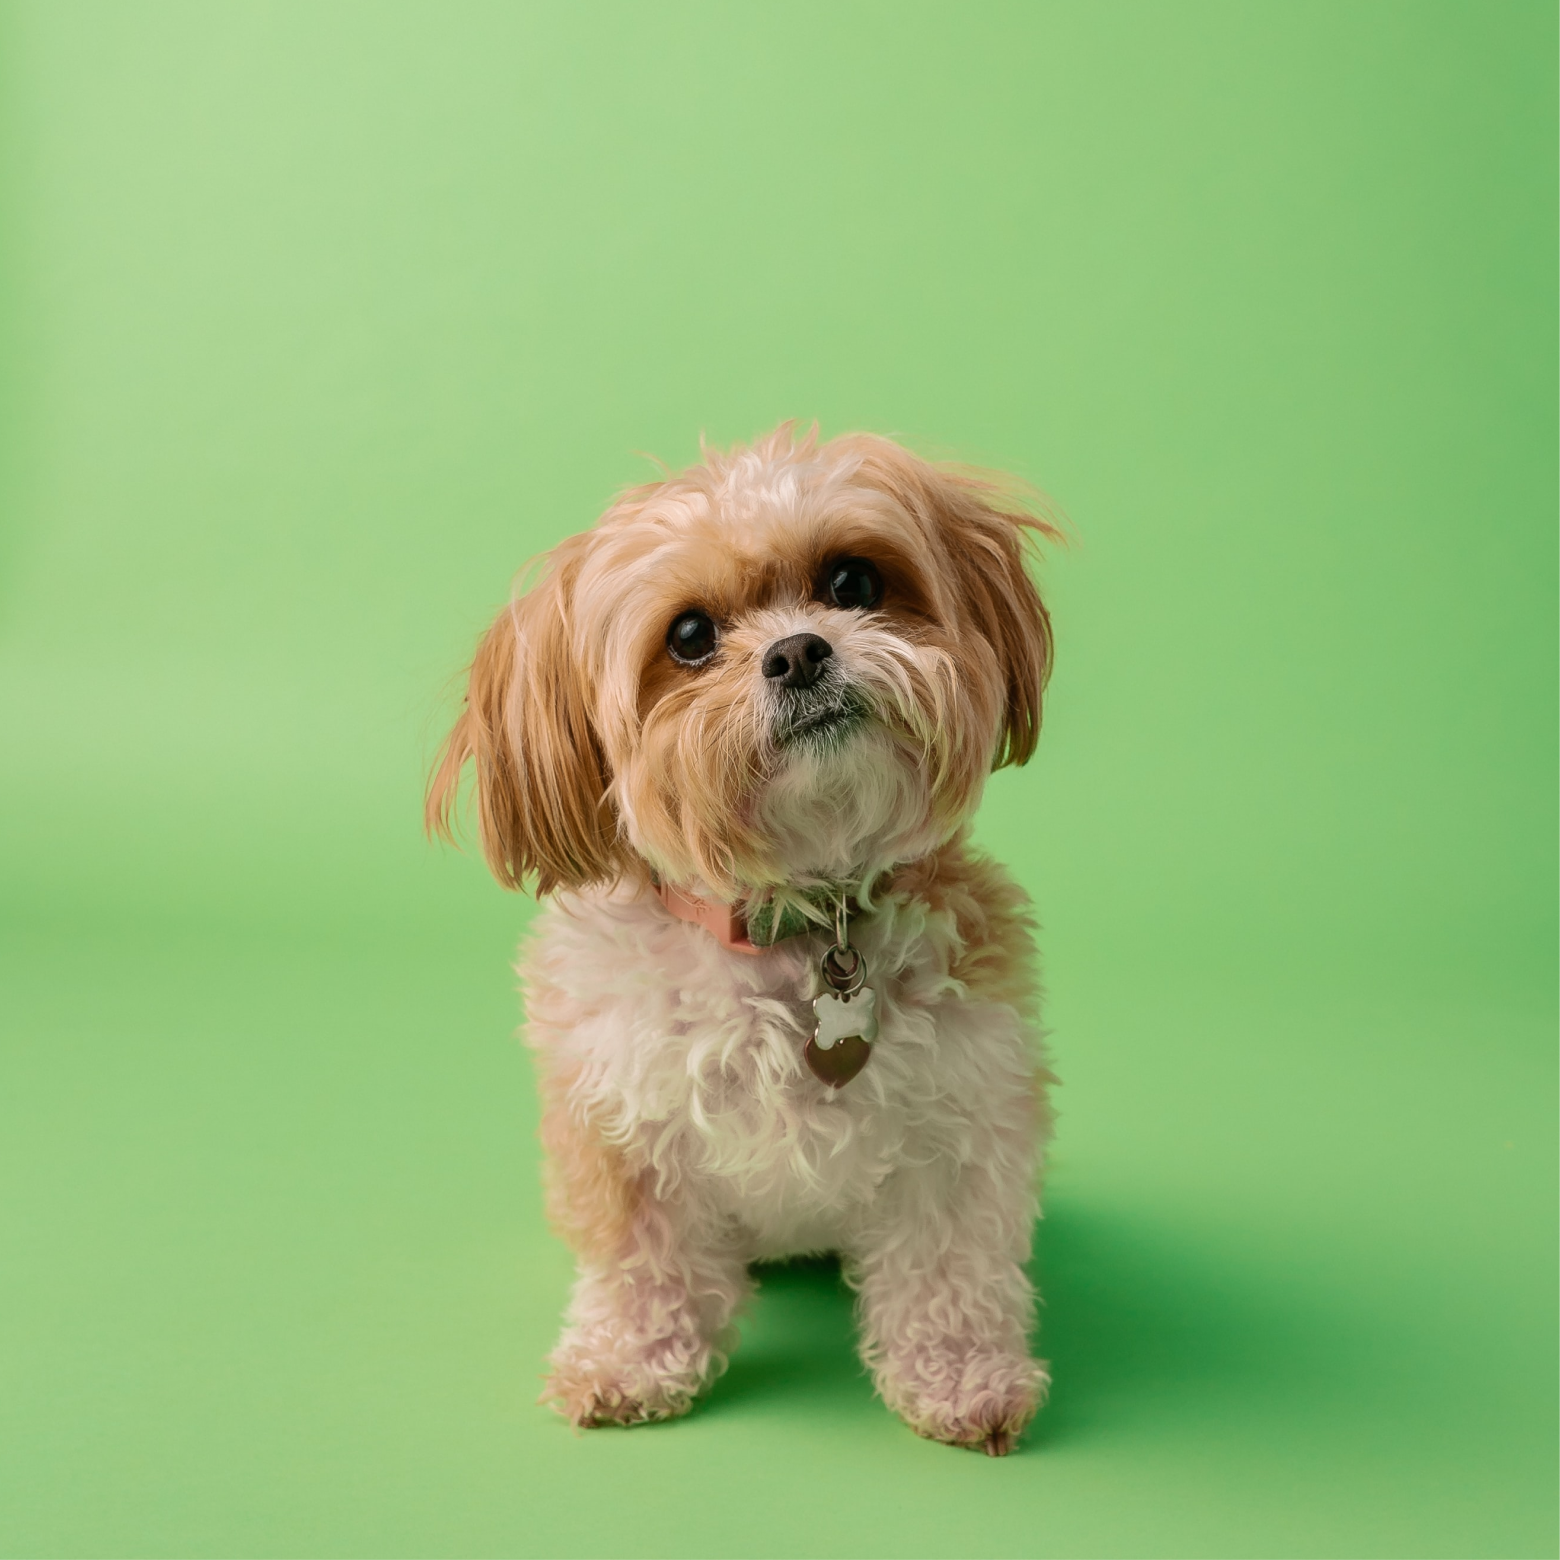 Portrait of a white and brown long coated small dog on green textile.